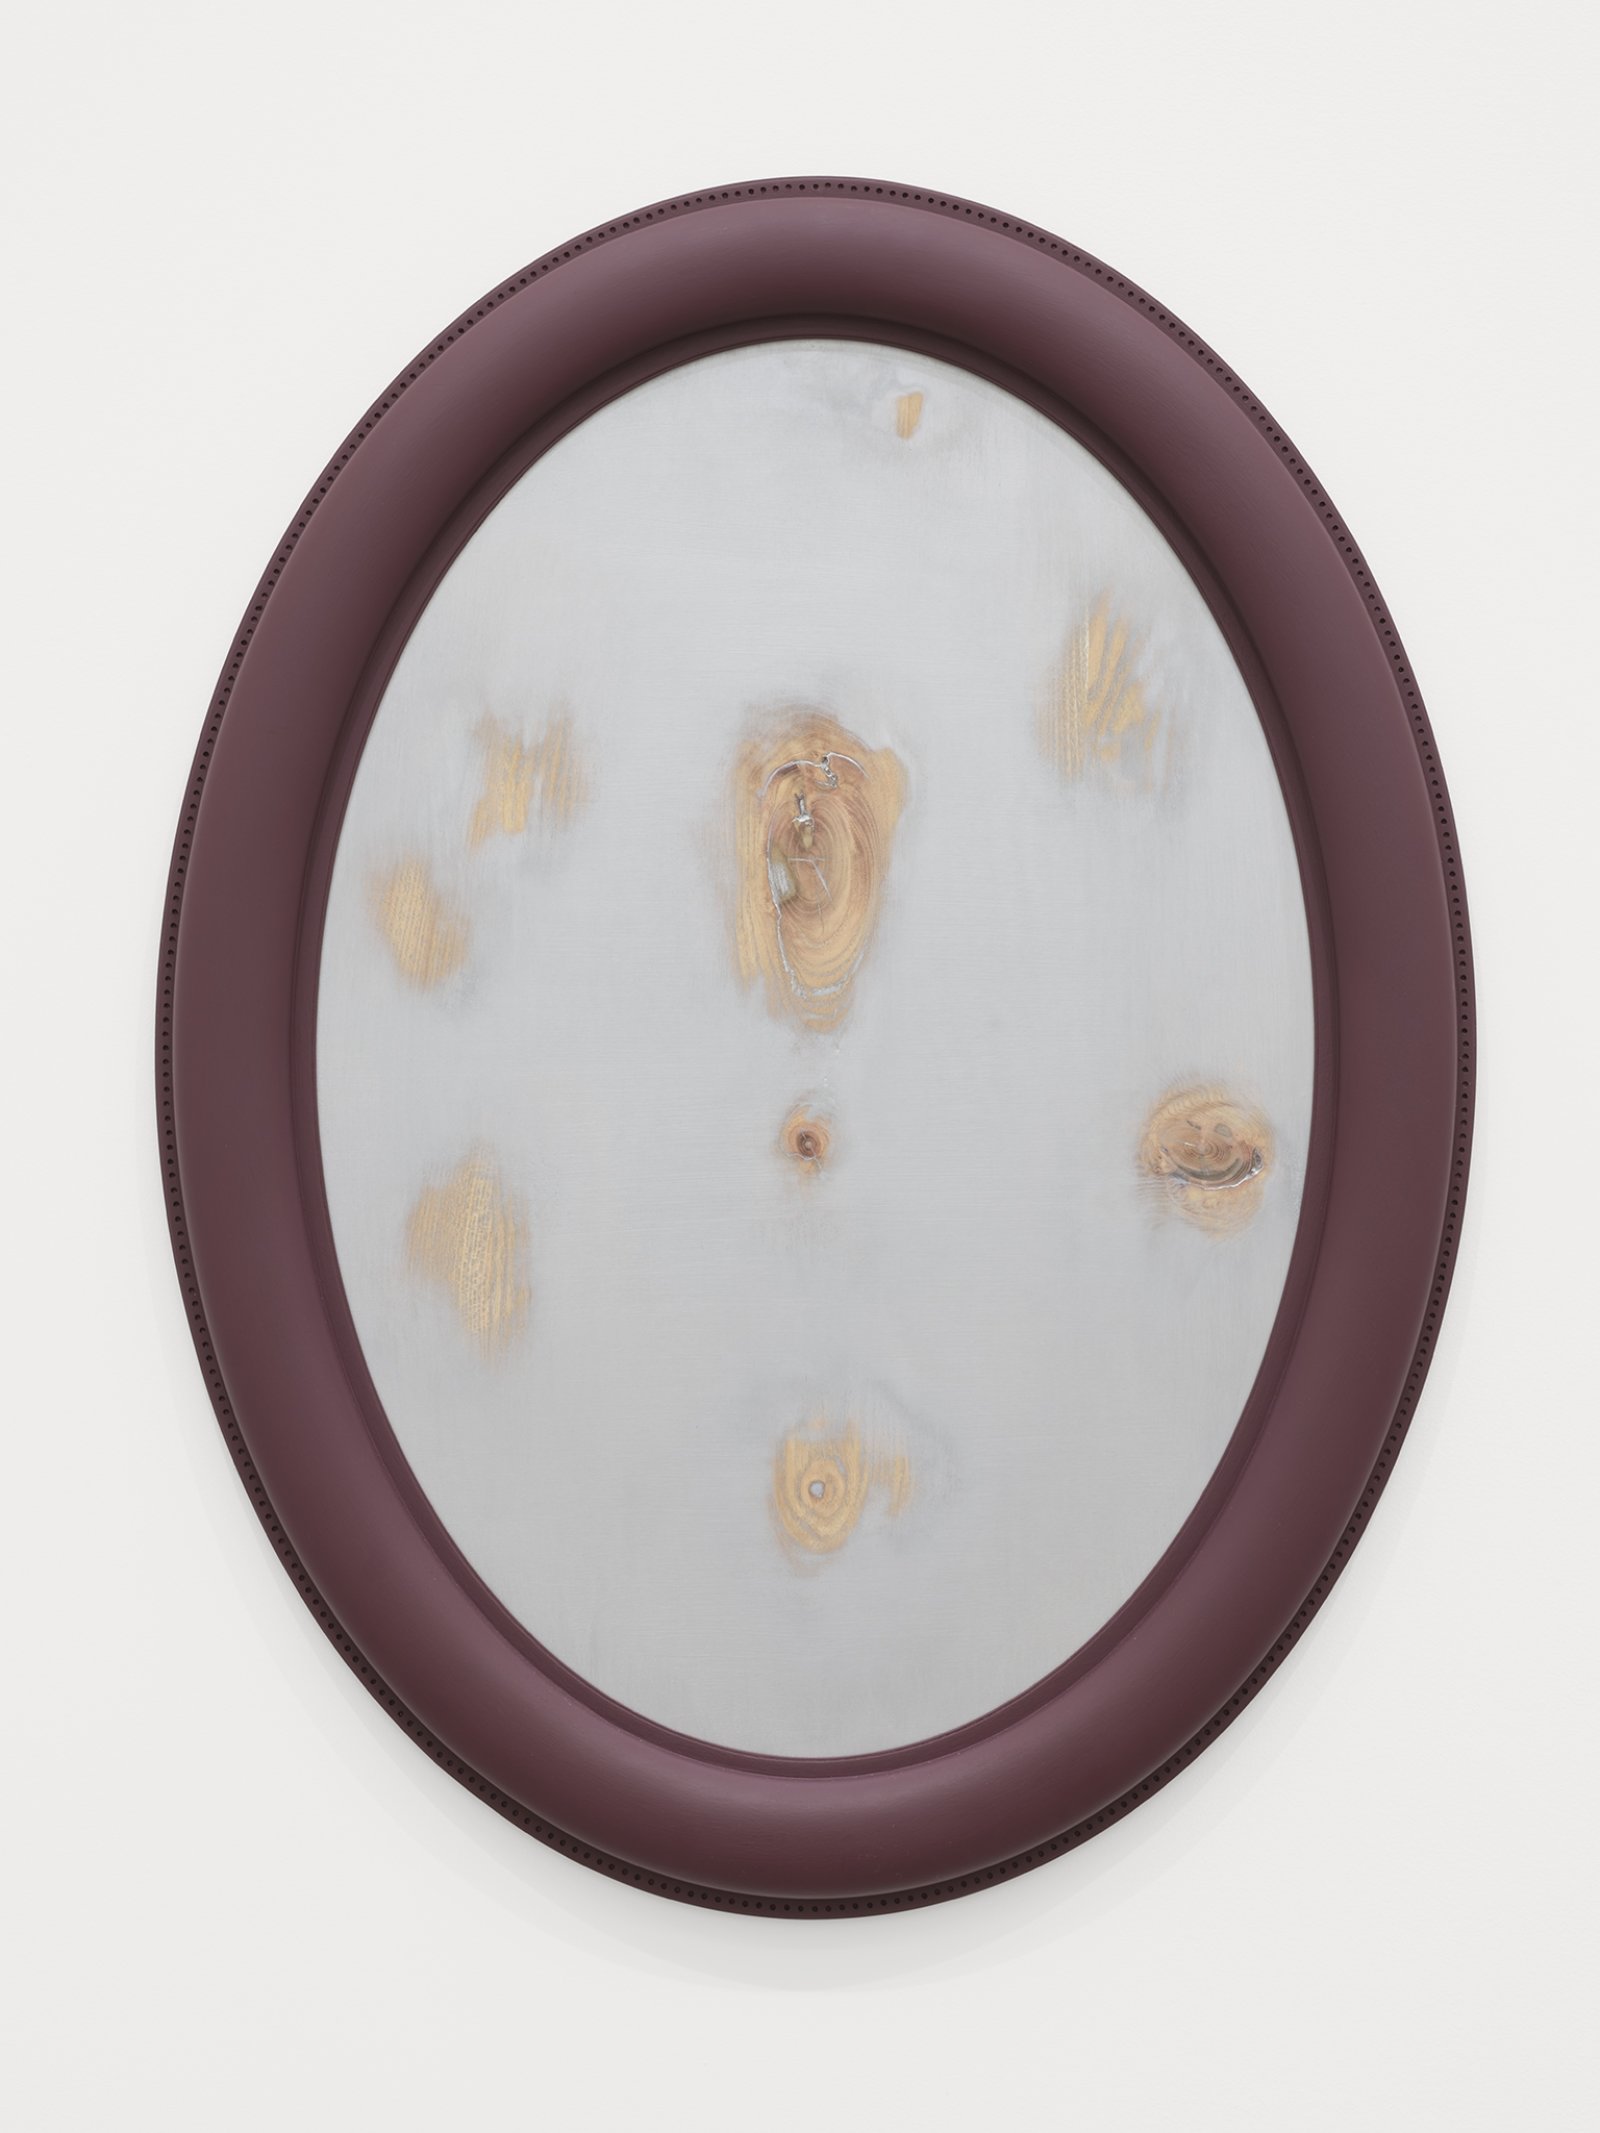 Ashes Withyman, Traceless, no more need to hide (now the old mirror reflects everything), 2020, basswood wood, honey locust wood, paint, 30 x 23 in. (76 x 57 cm)